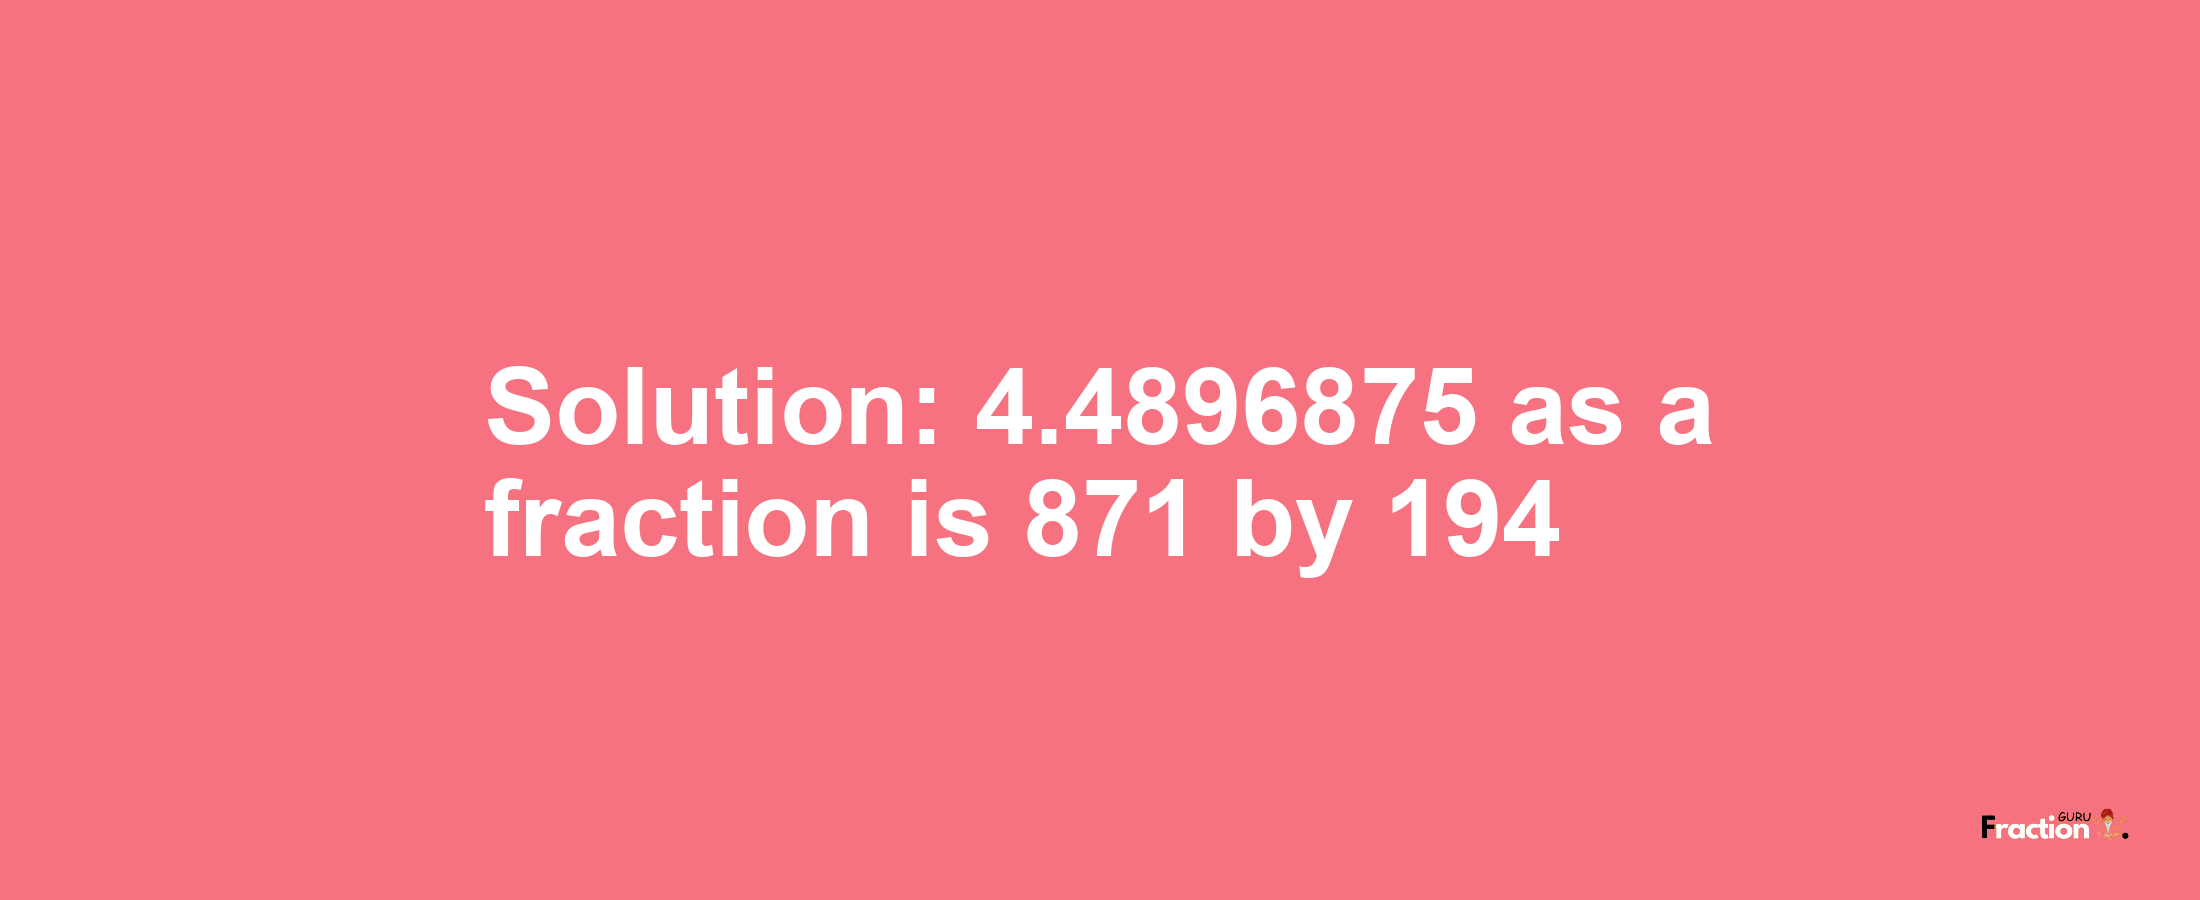 Solution:4.4896875 as a fraction is 871/194